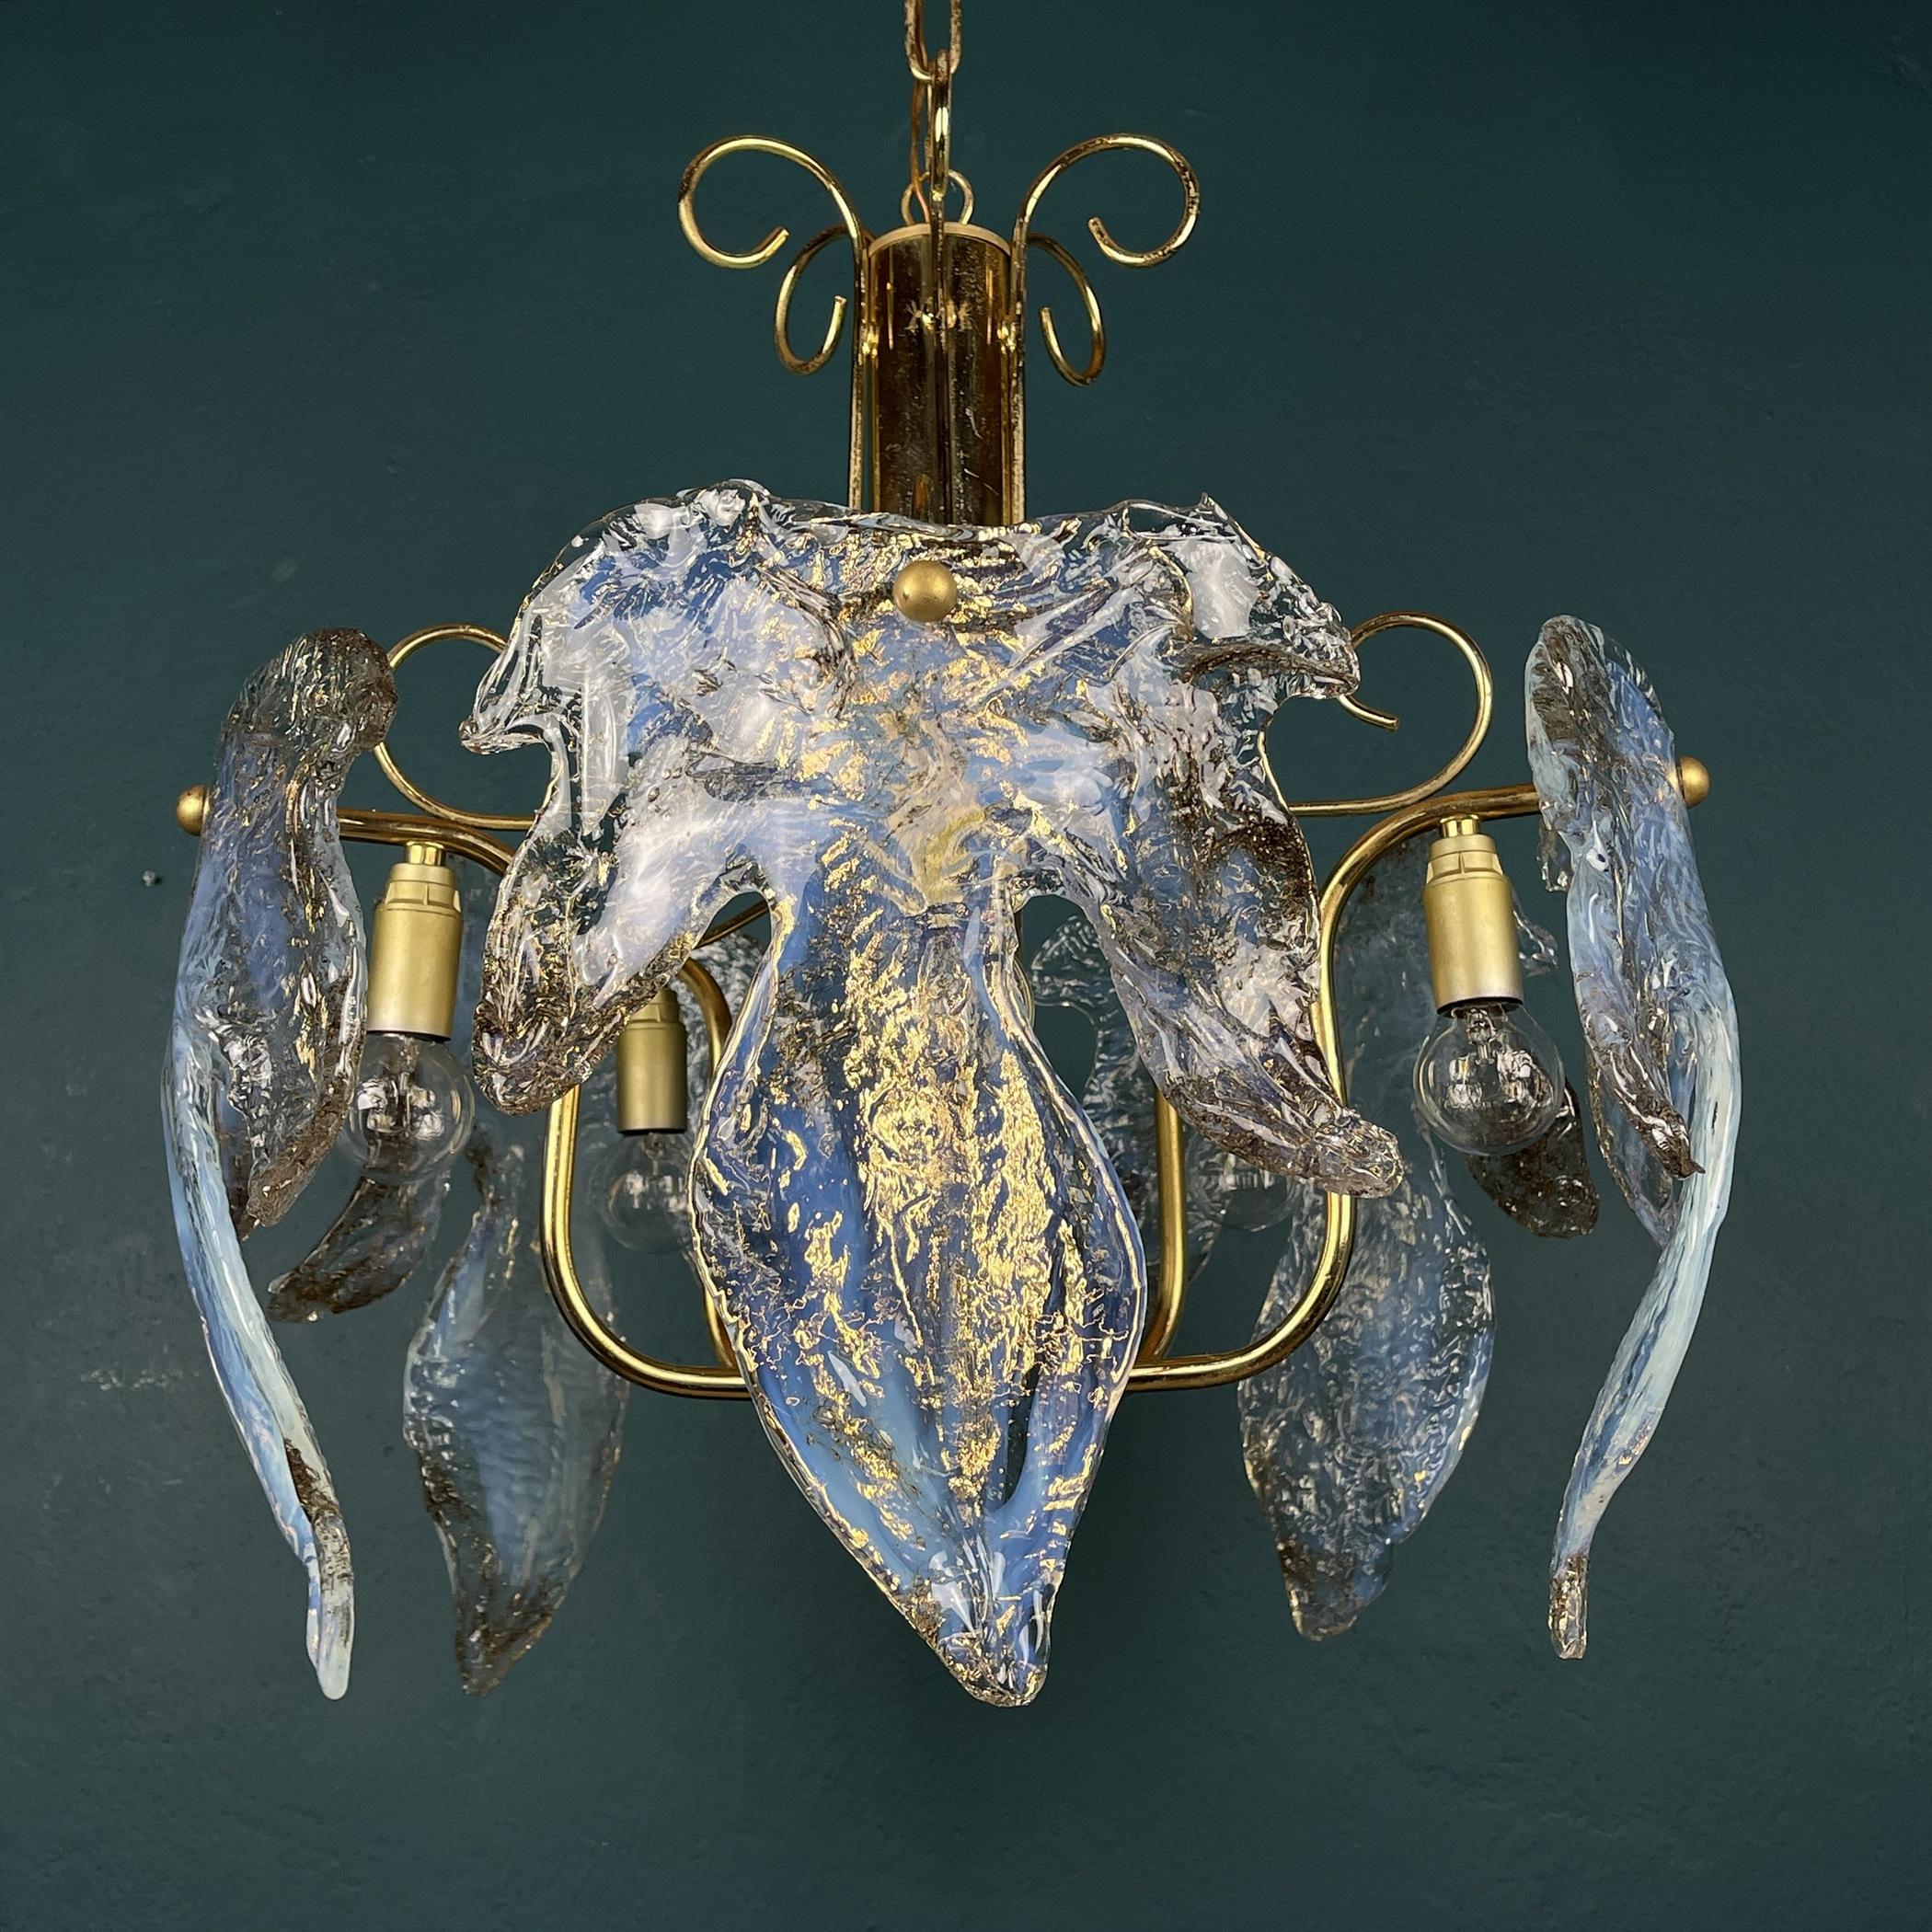 The absolutely fantastic vintage Murano glass chandelier made in Italy in the 1970s.
Consists of glass plates of Murano glass, made by Italian glassblowers. They follow the oldest Murano glassmaking technologies that were invented on the island of